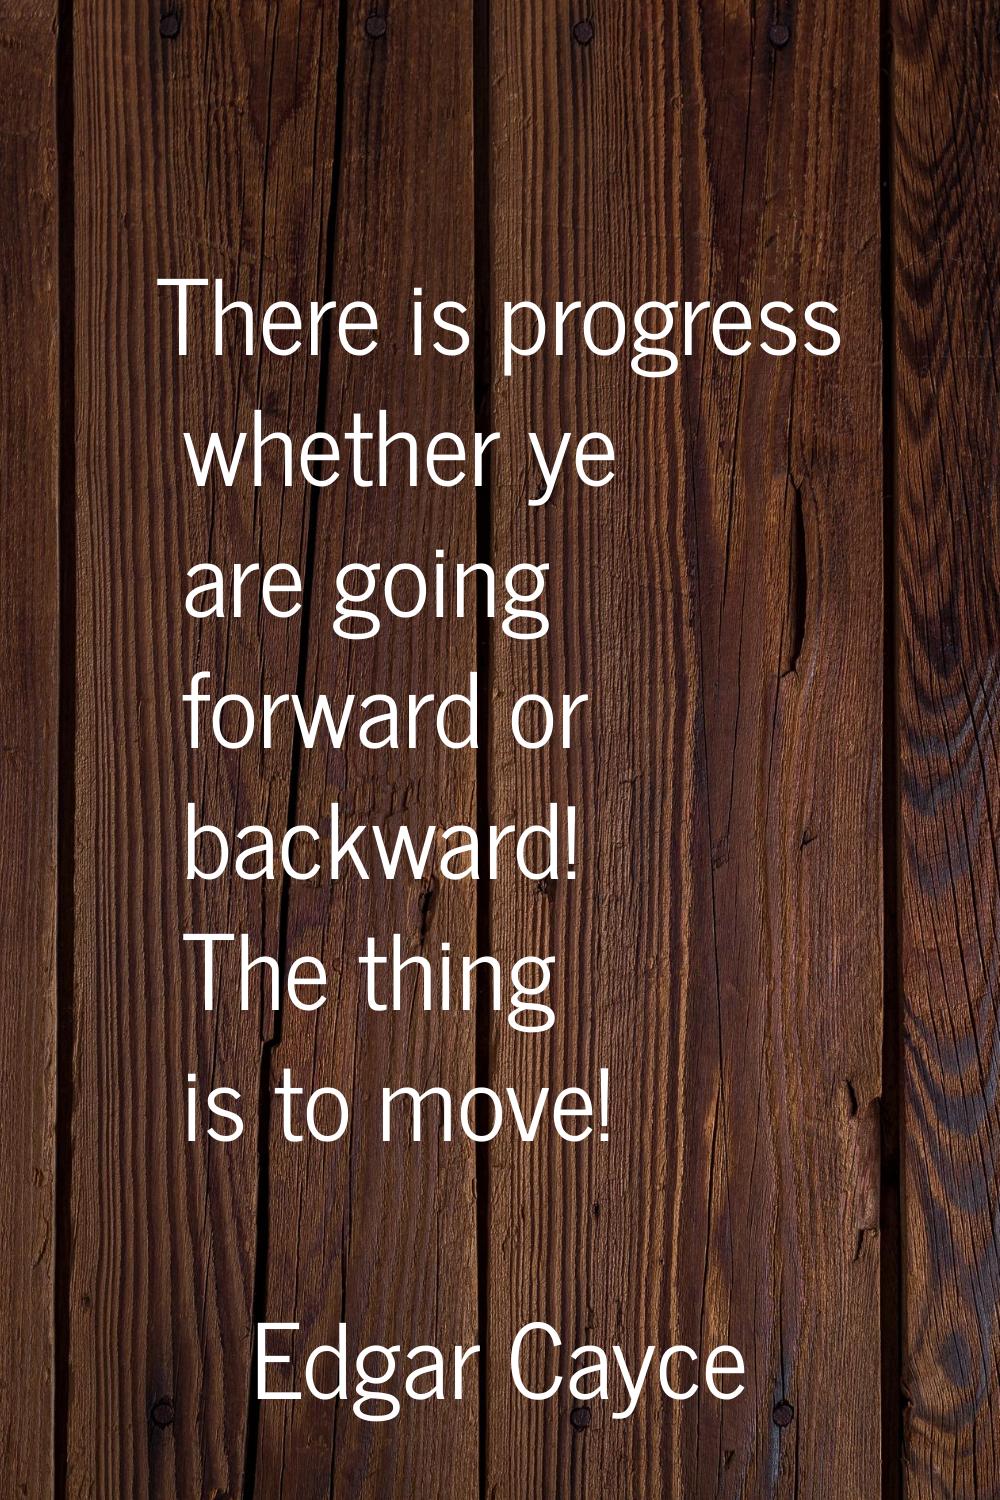 There is progress whether ye are going forward or backward! The thing is to move!